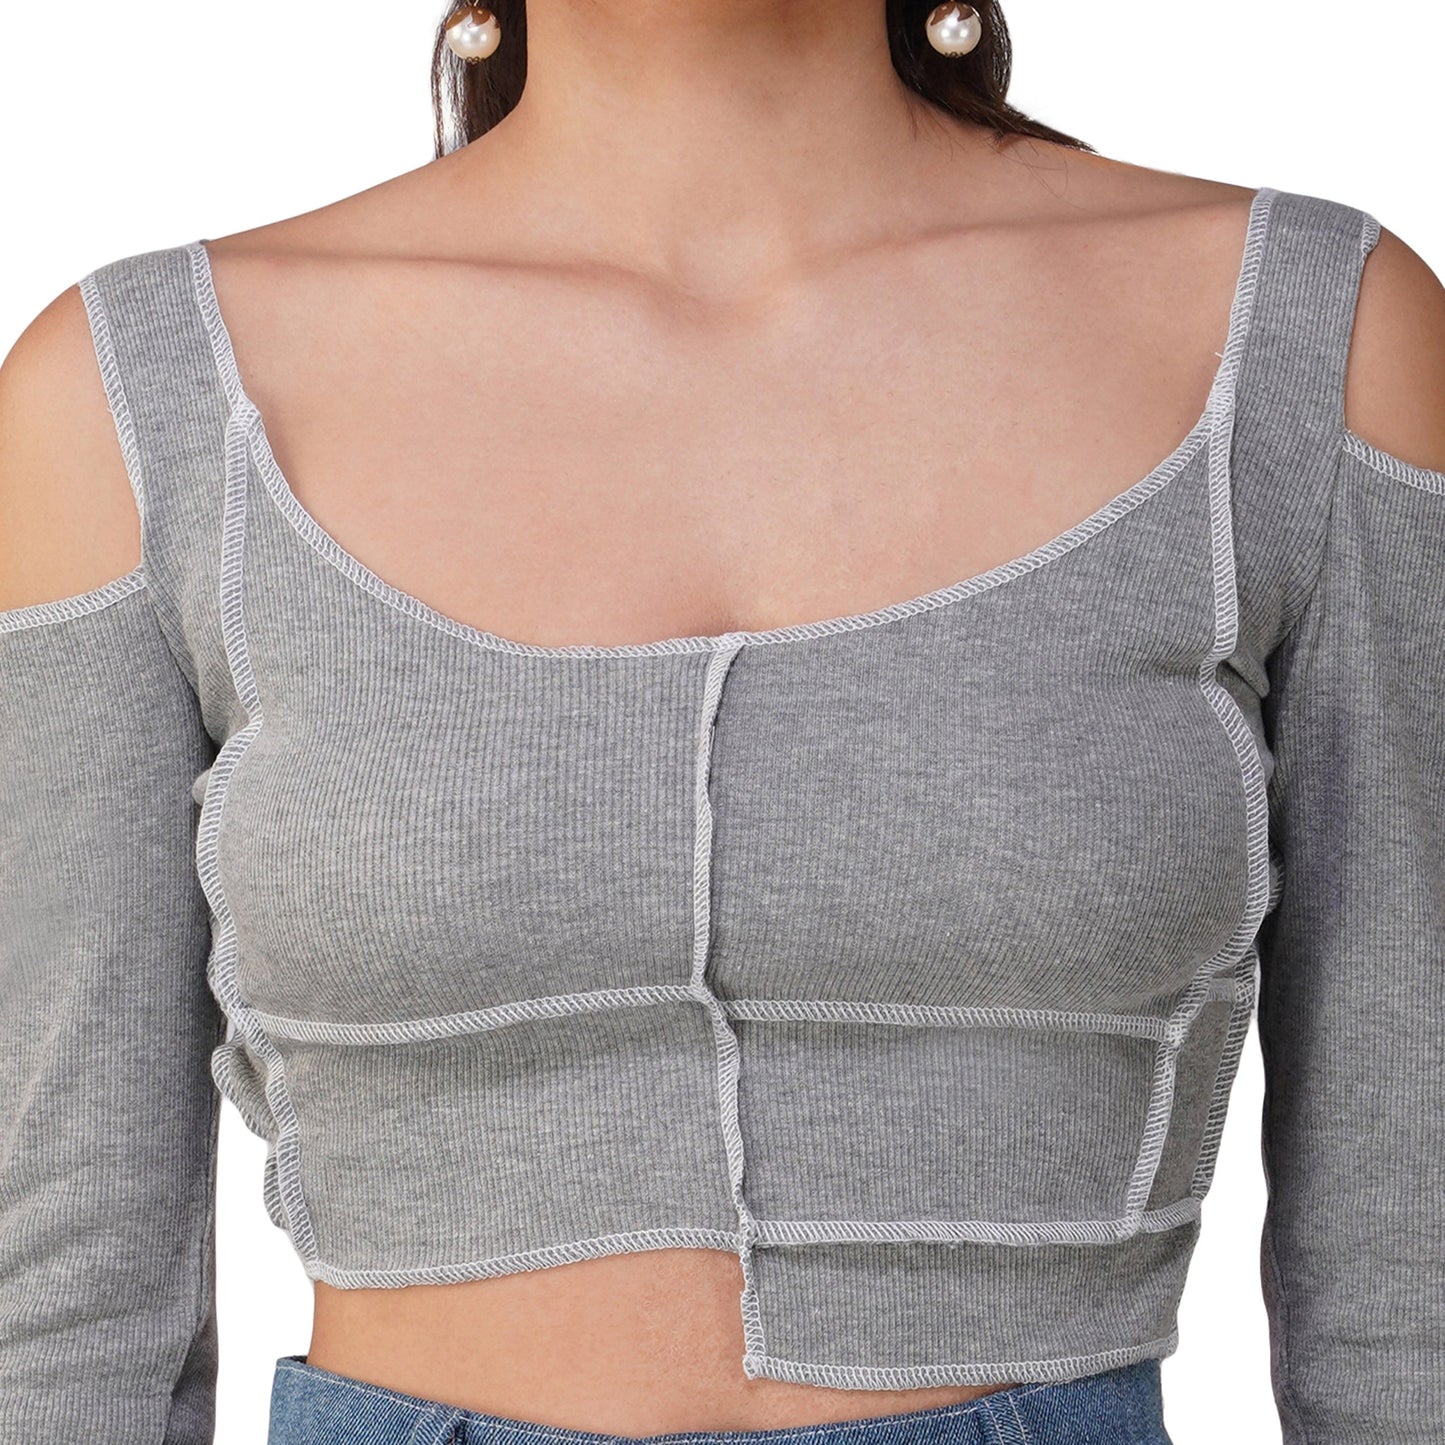 SLAY. Women's Contrast Stitch Light Grey Cold Shoulder Rib Full Sleeves Top & Jeans Co-ord Set